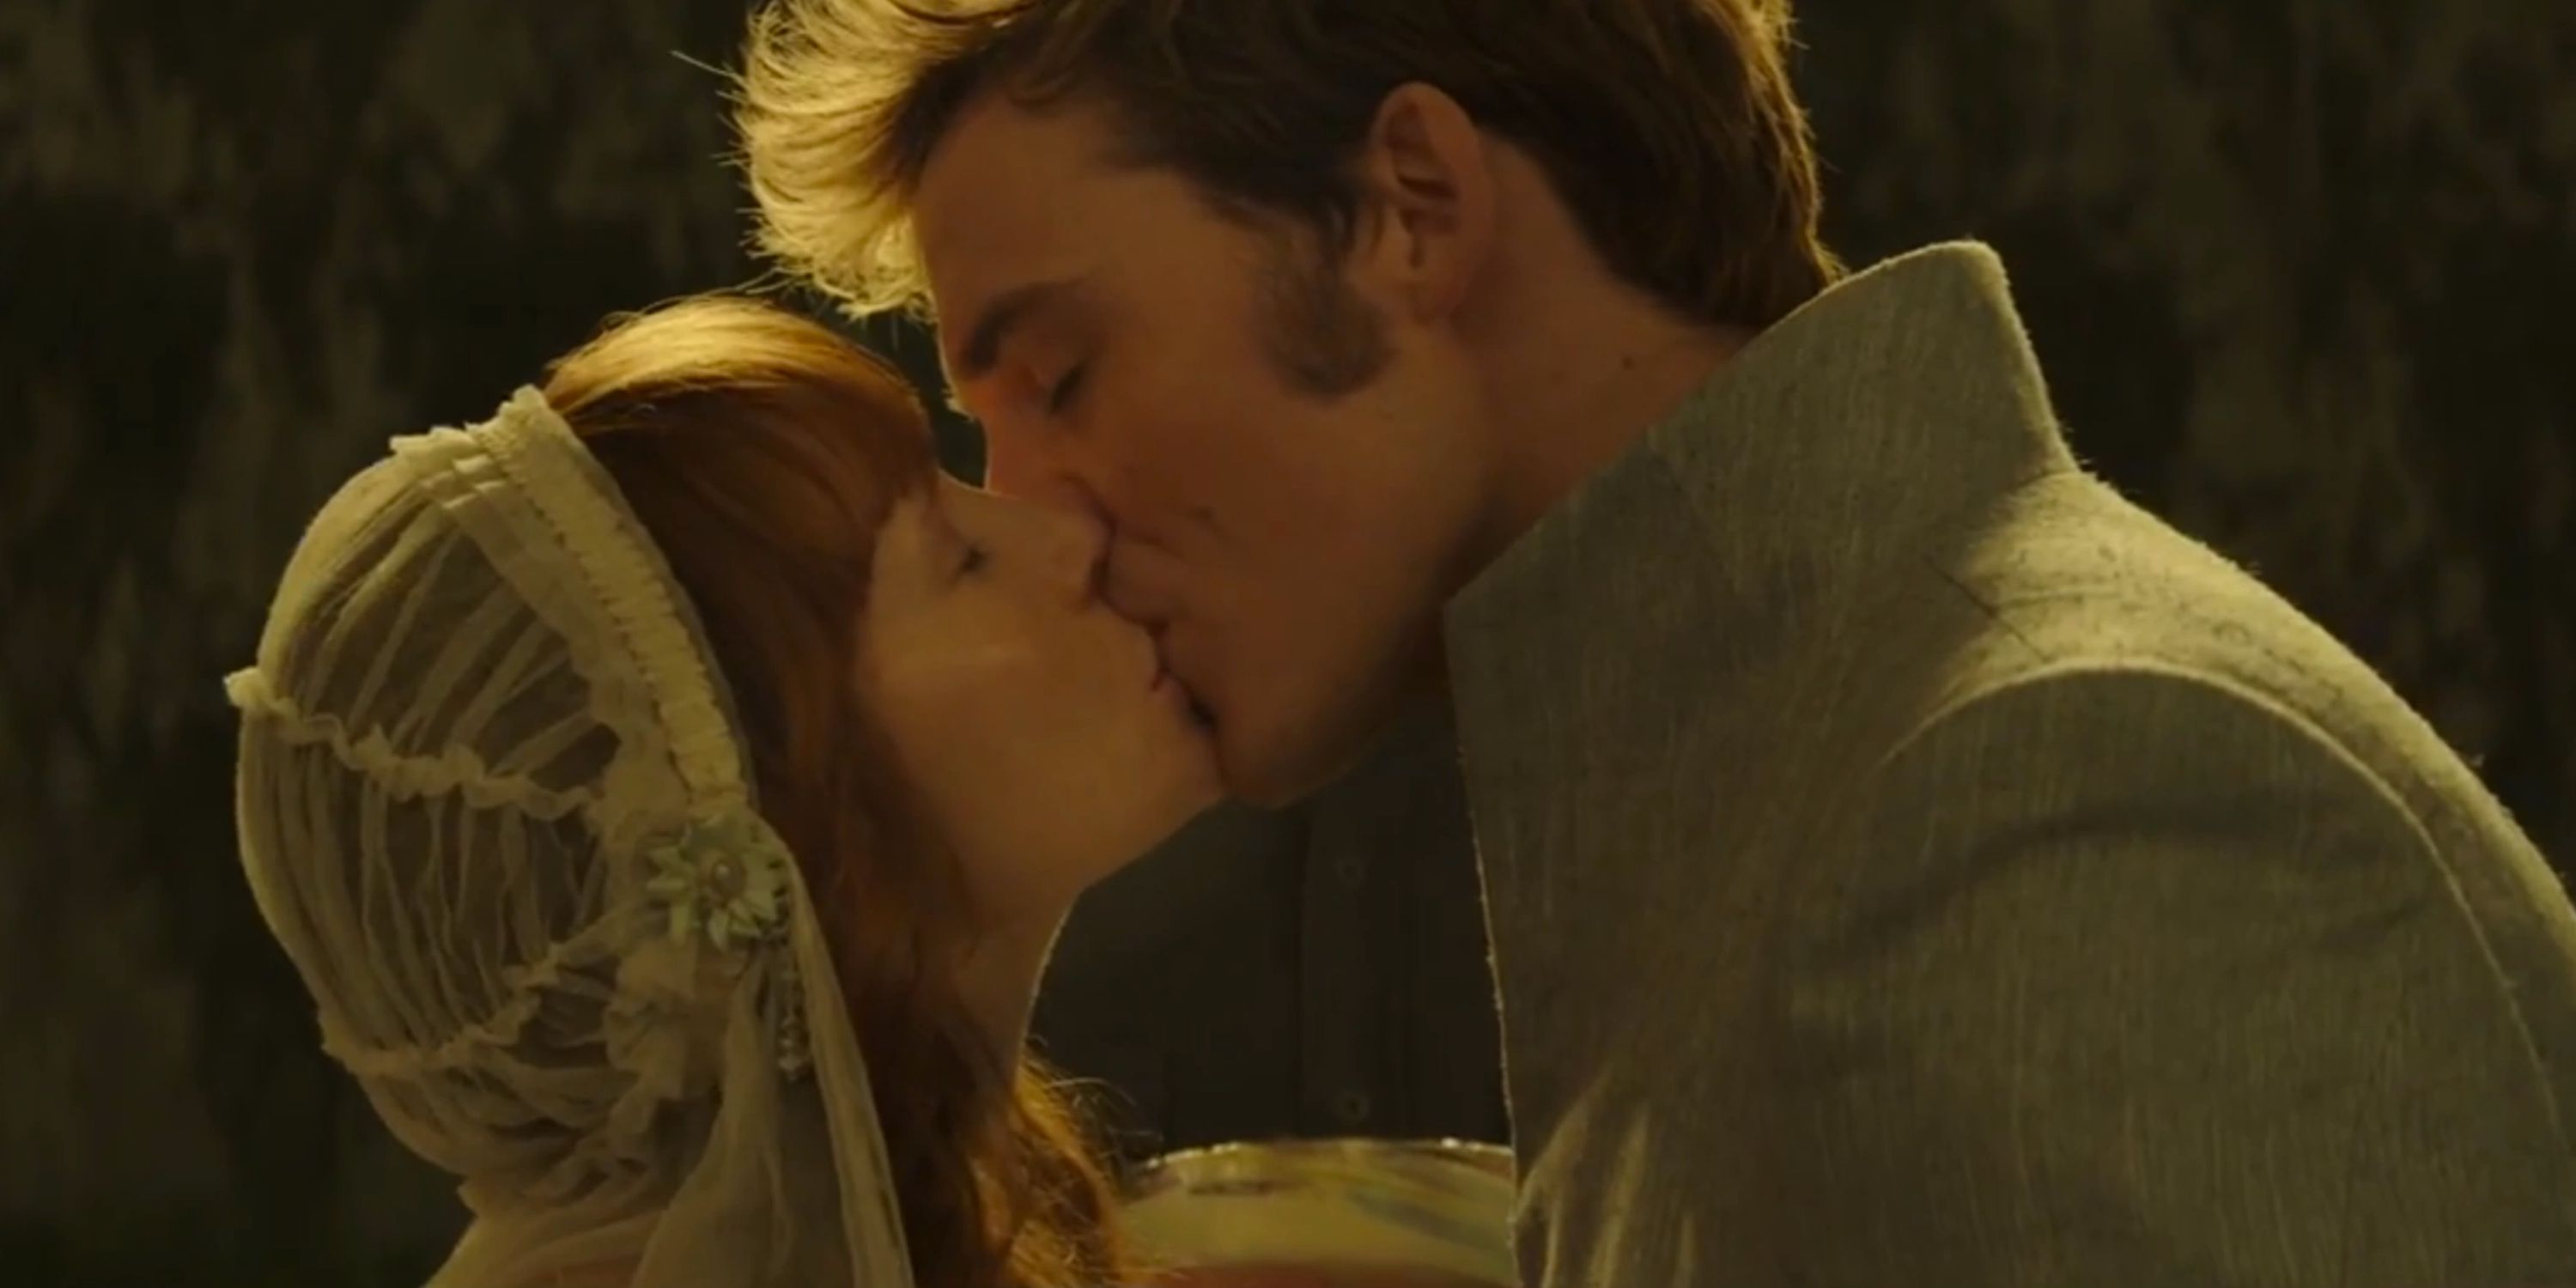 Annie Cresta and Finnick Odair kiss in The Hunger Games: Mockingjay Part 2